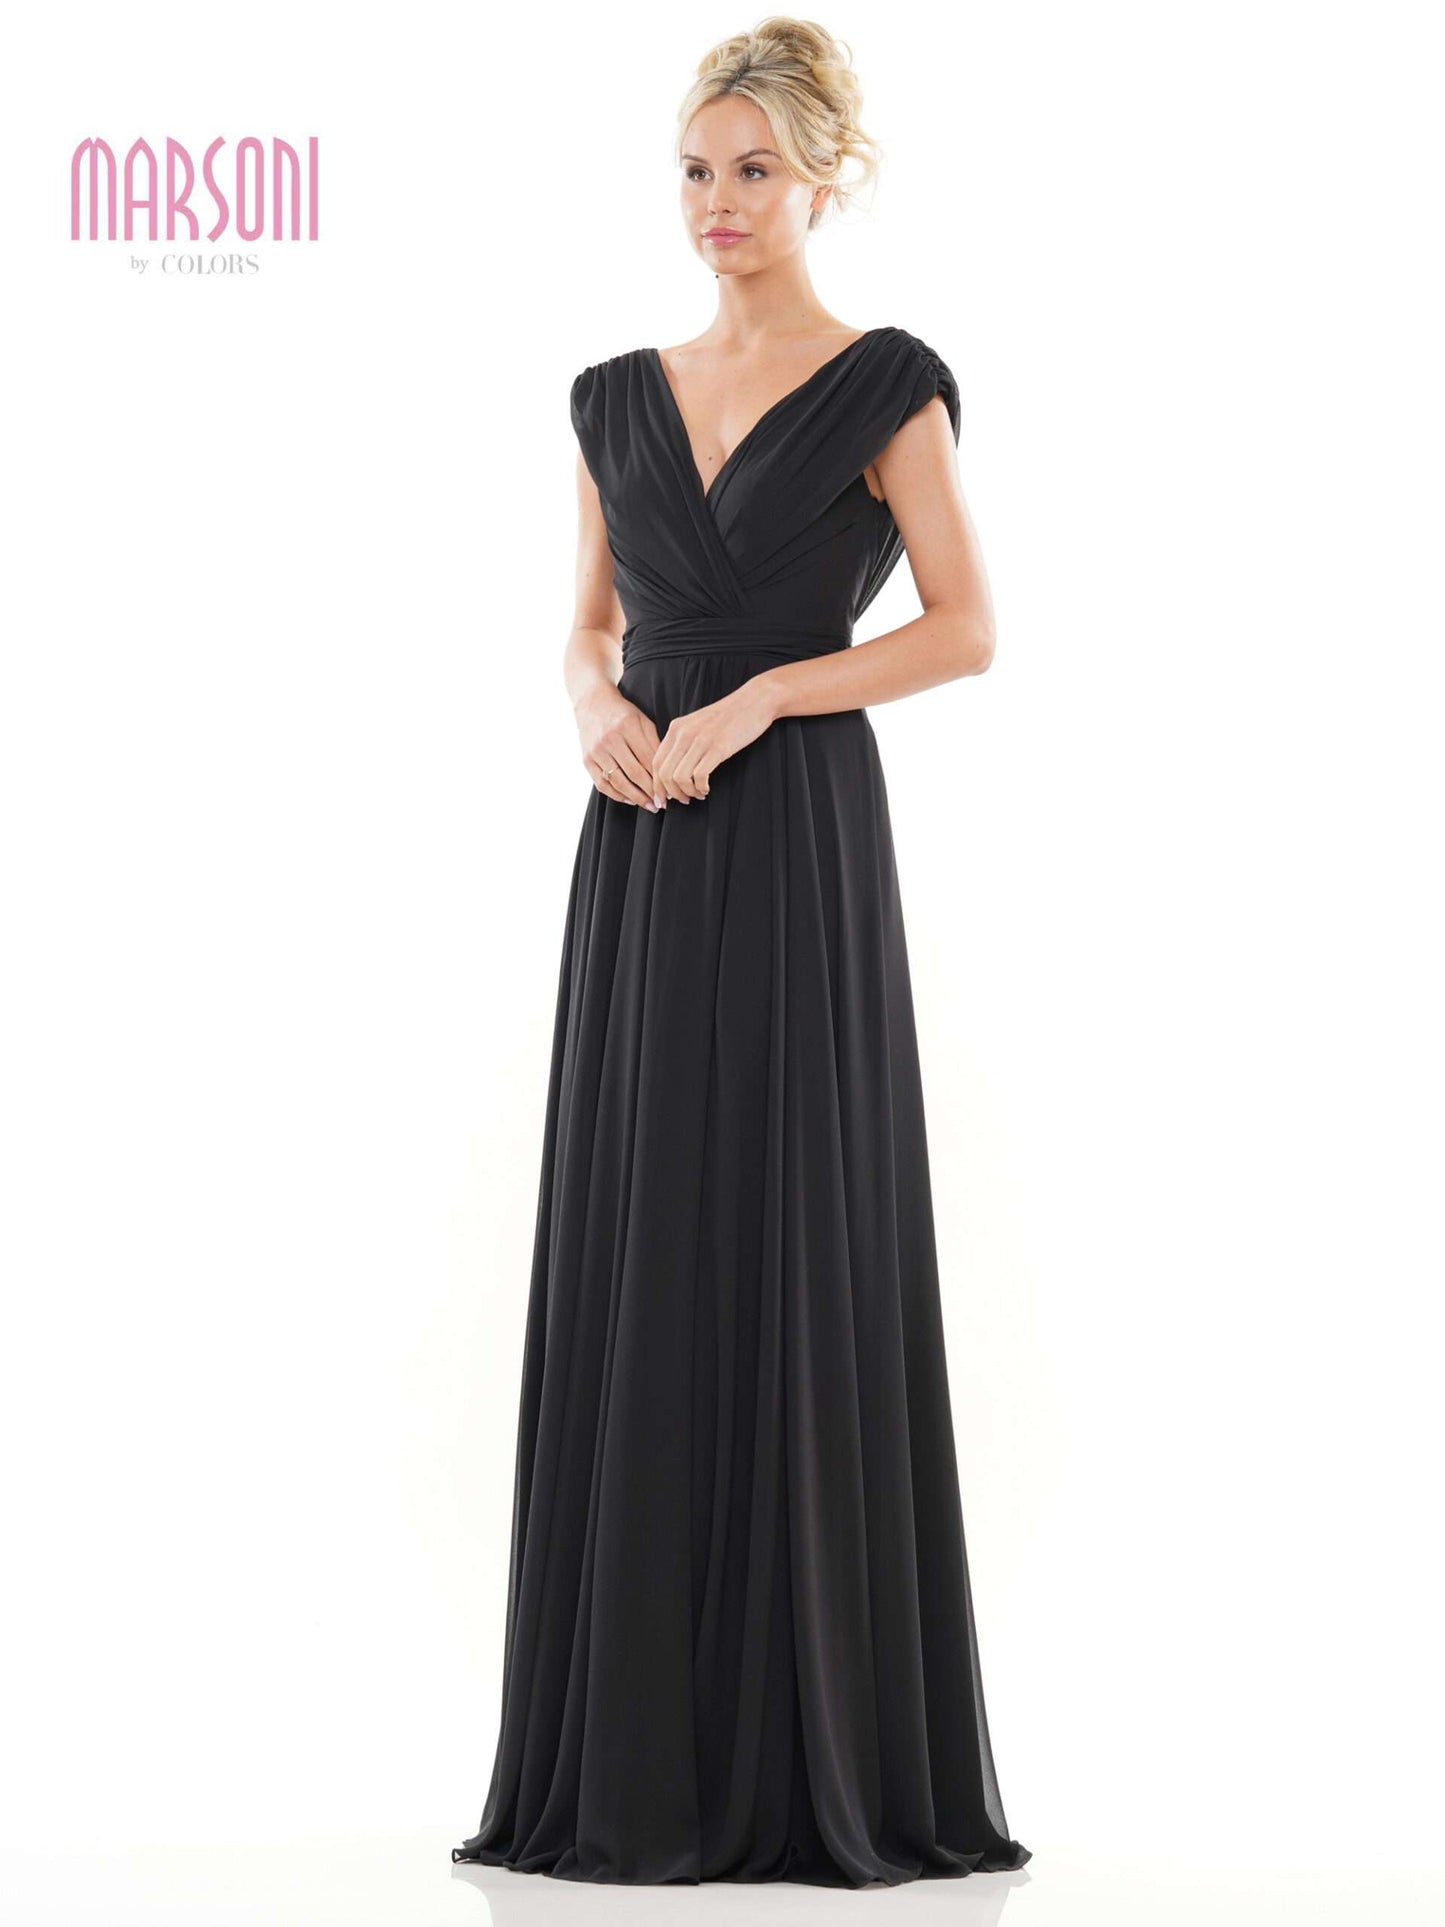 Marsoni Mother of the Bride Long Formal Dress 251